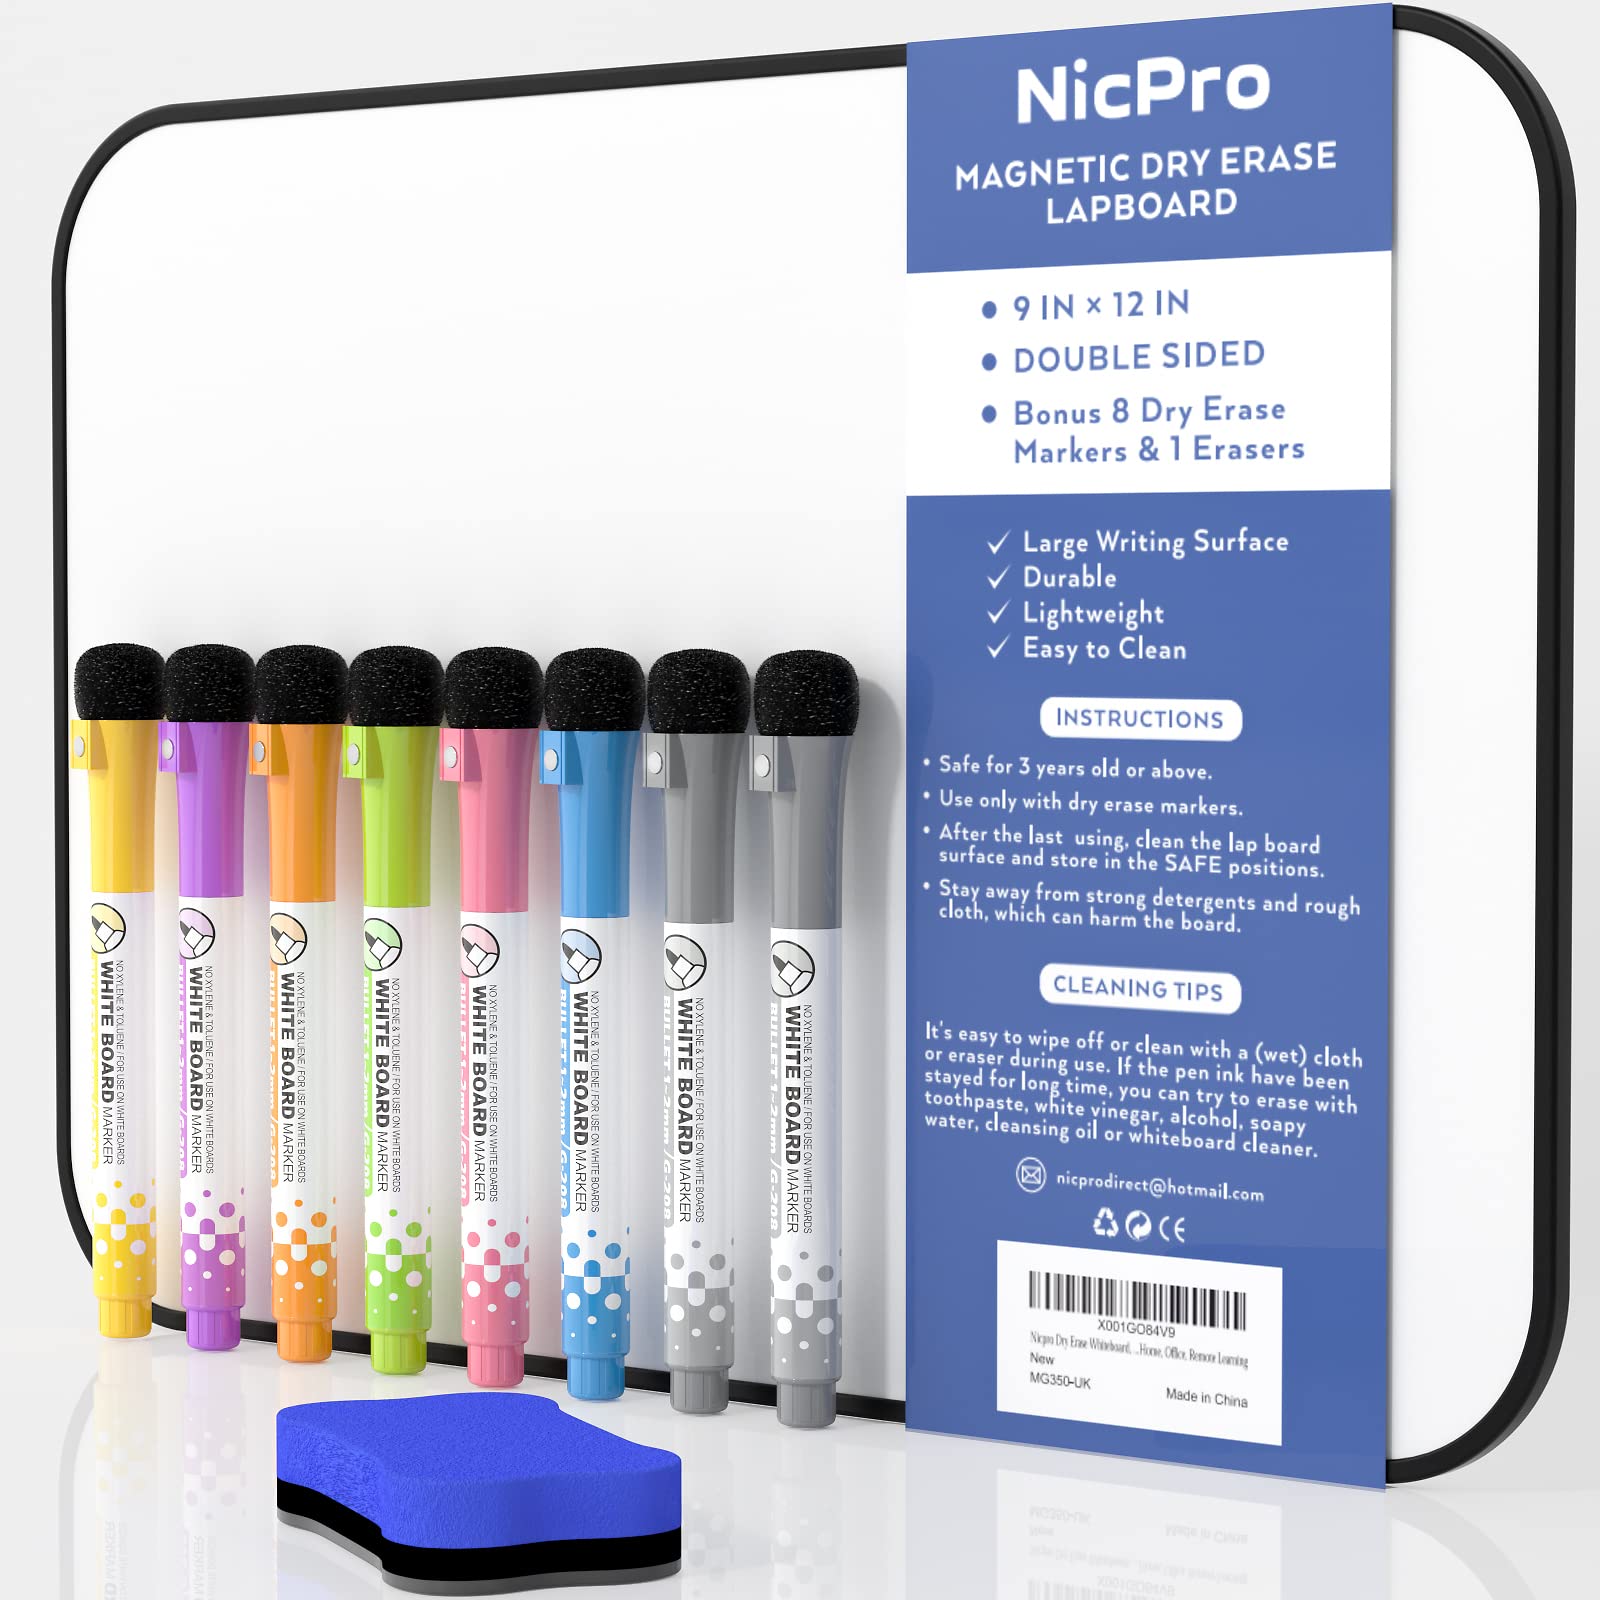 Nicpro Dry Erase Whiteboard A4, Magnetic Double Sided 21 x 30 cm White Board with Black Border, Including 8 Water-Based Pens and 1 Eraser for Kid Writing & Drawing Student School, Home, Classroom Use